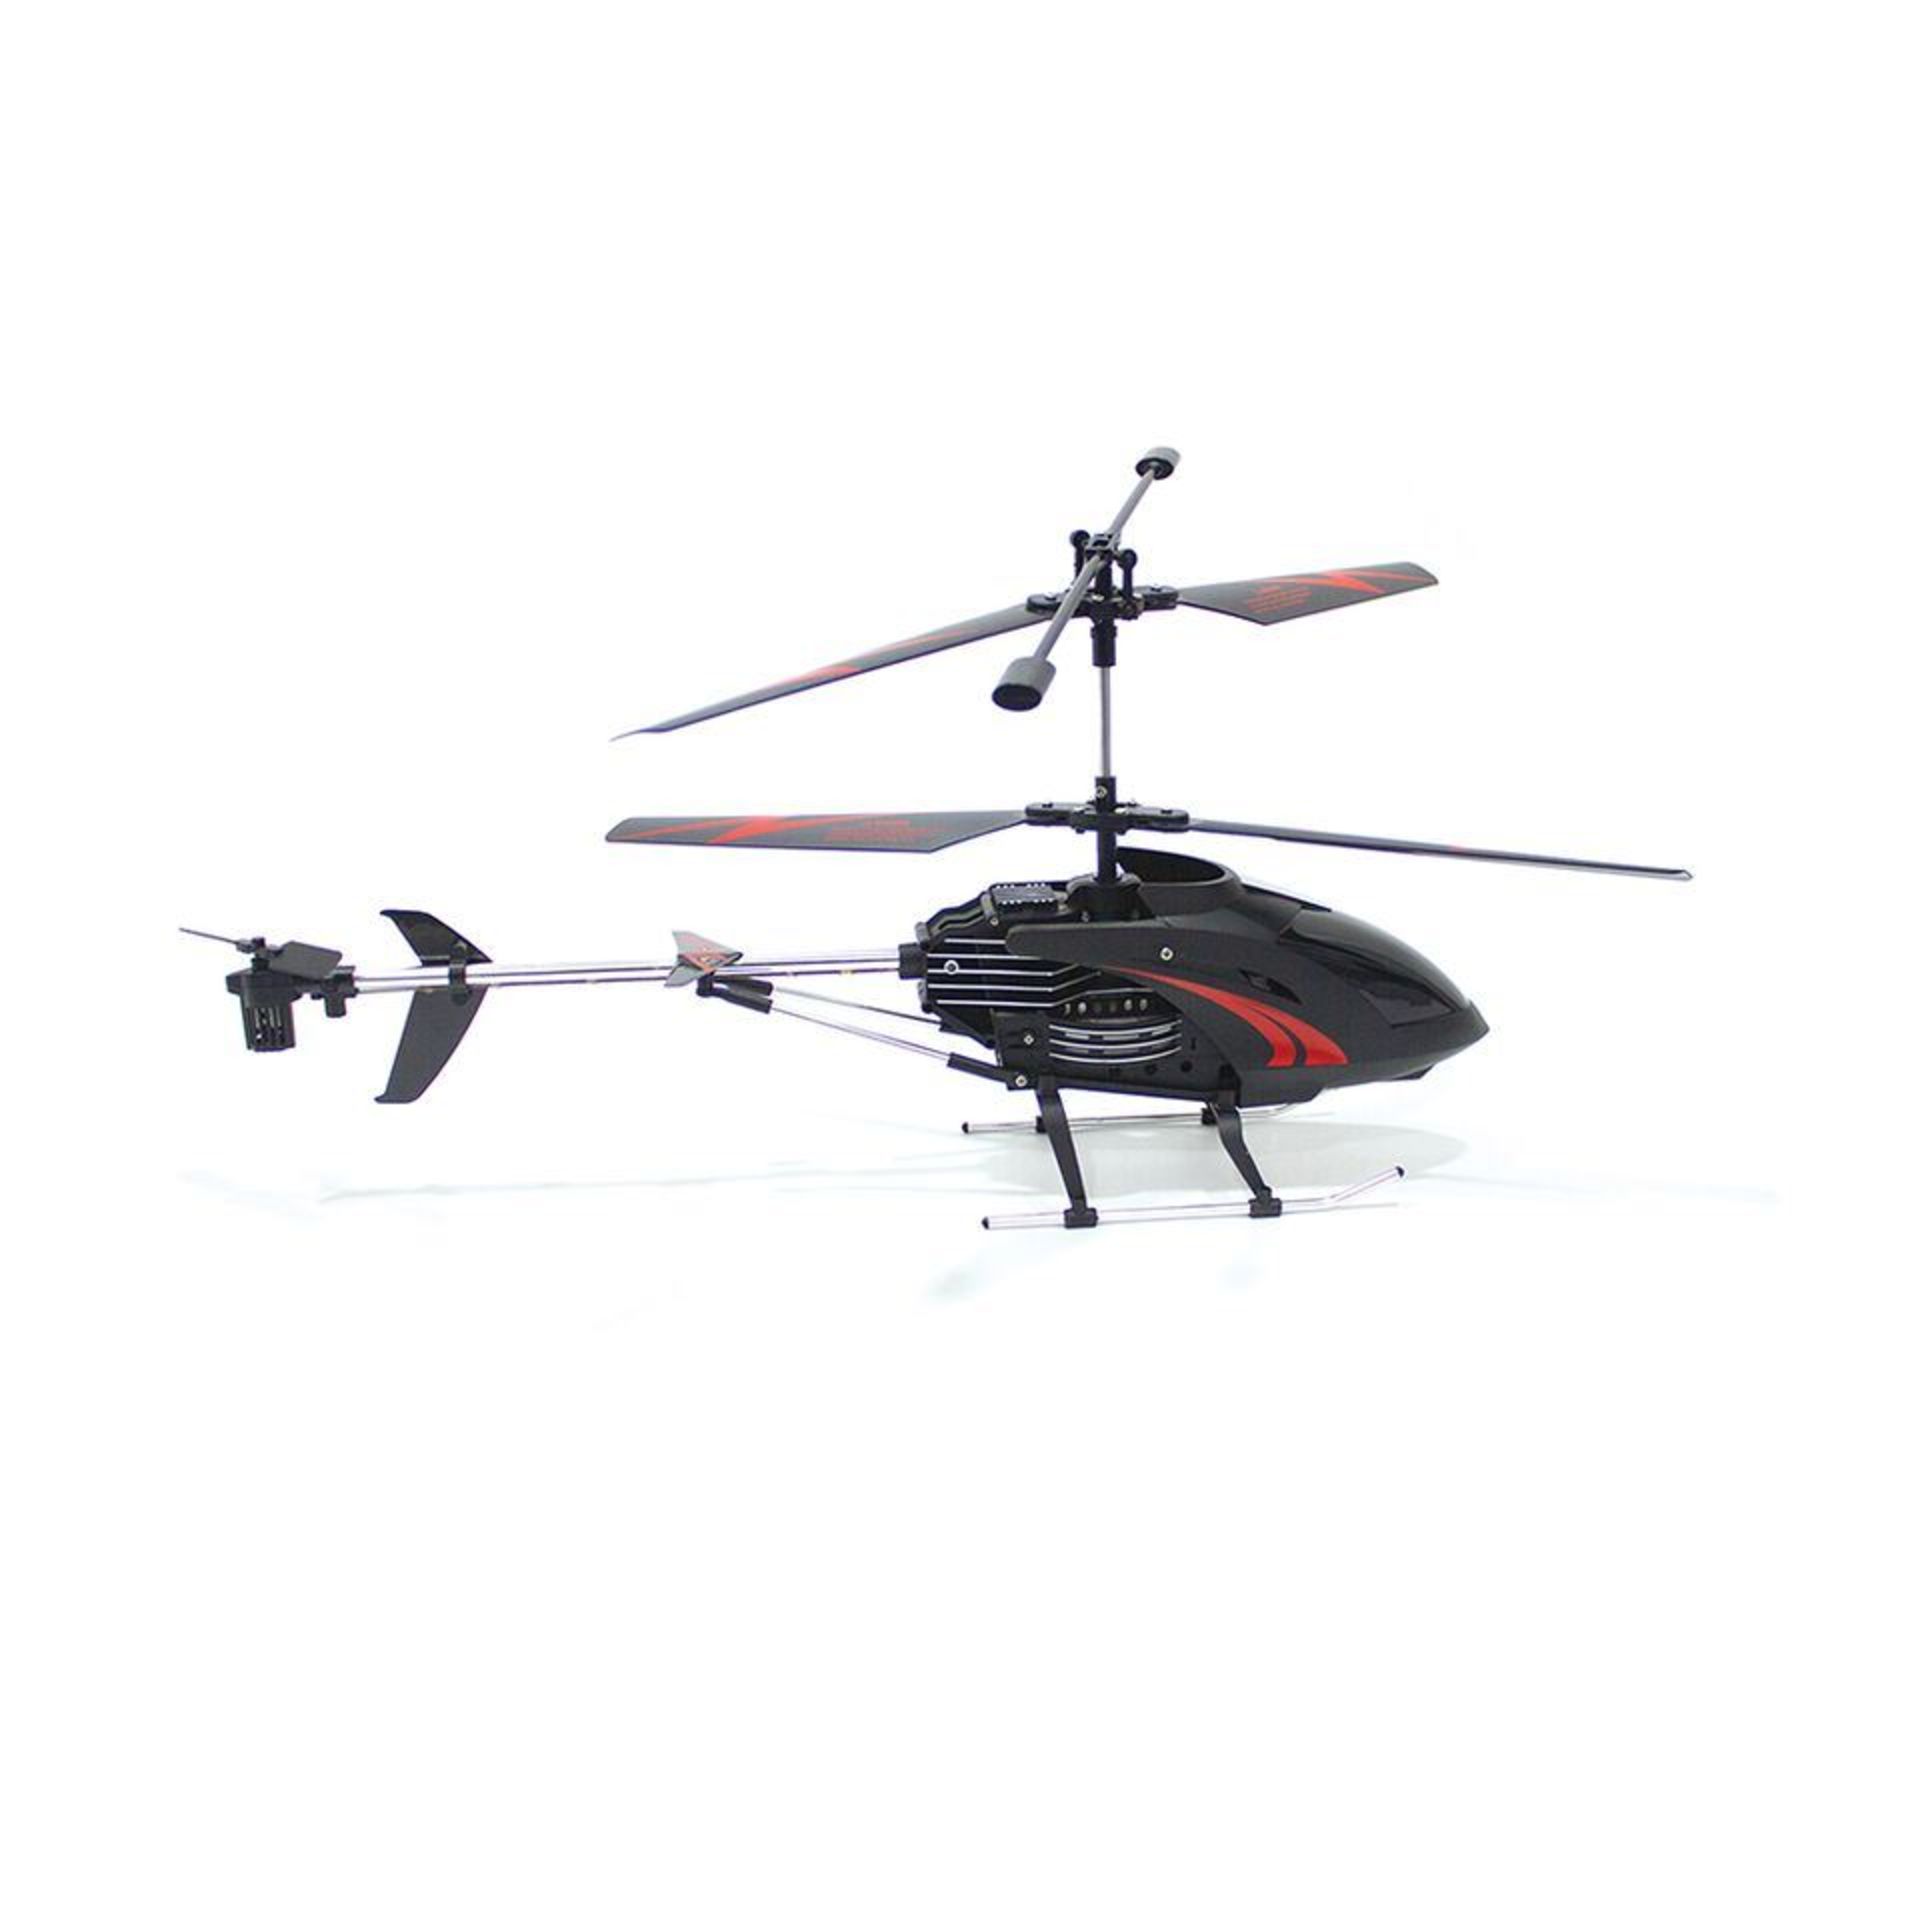 V Brand New Toughcopter 3.5 Channel R/C Helicopter With 3.0 Channel - Durable Body & Fuselage -